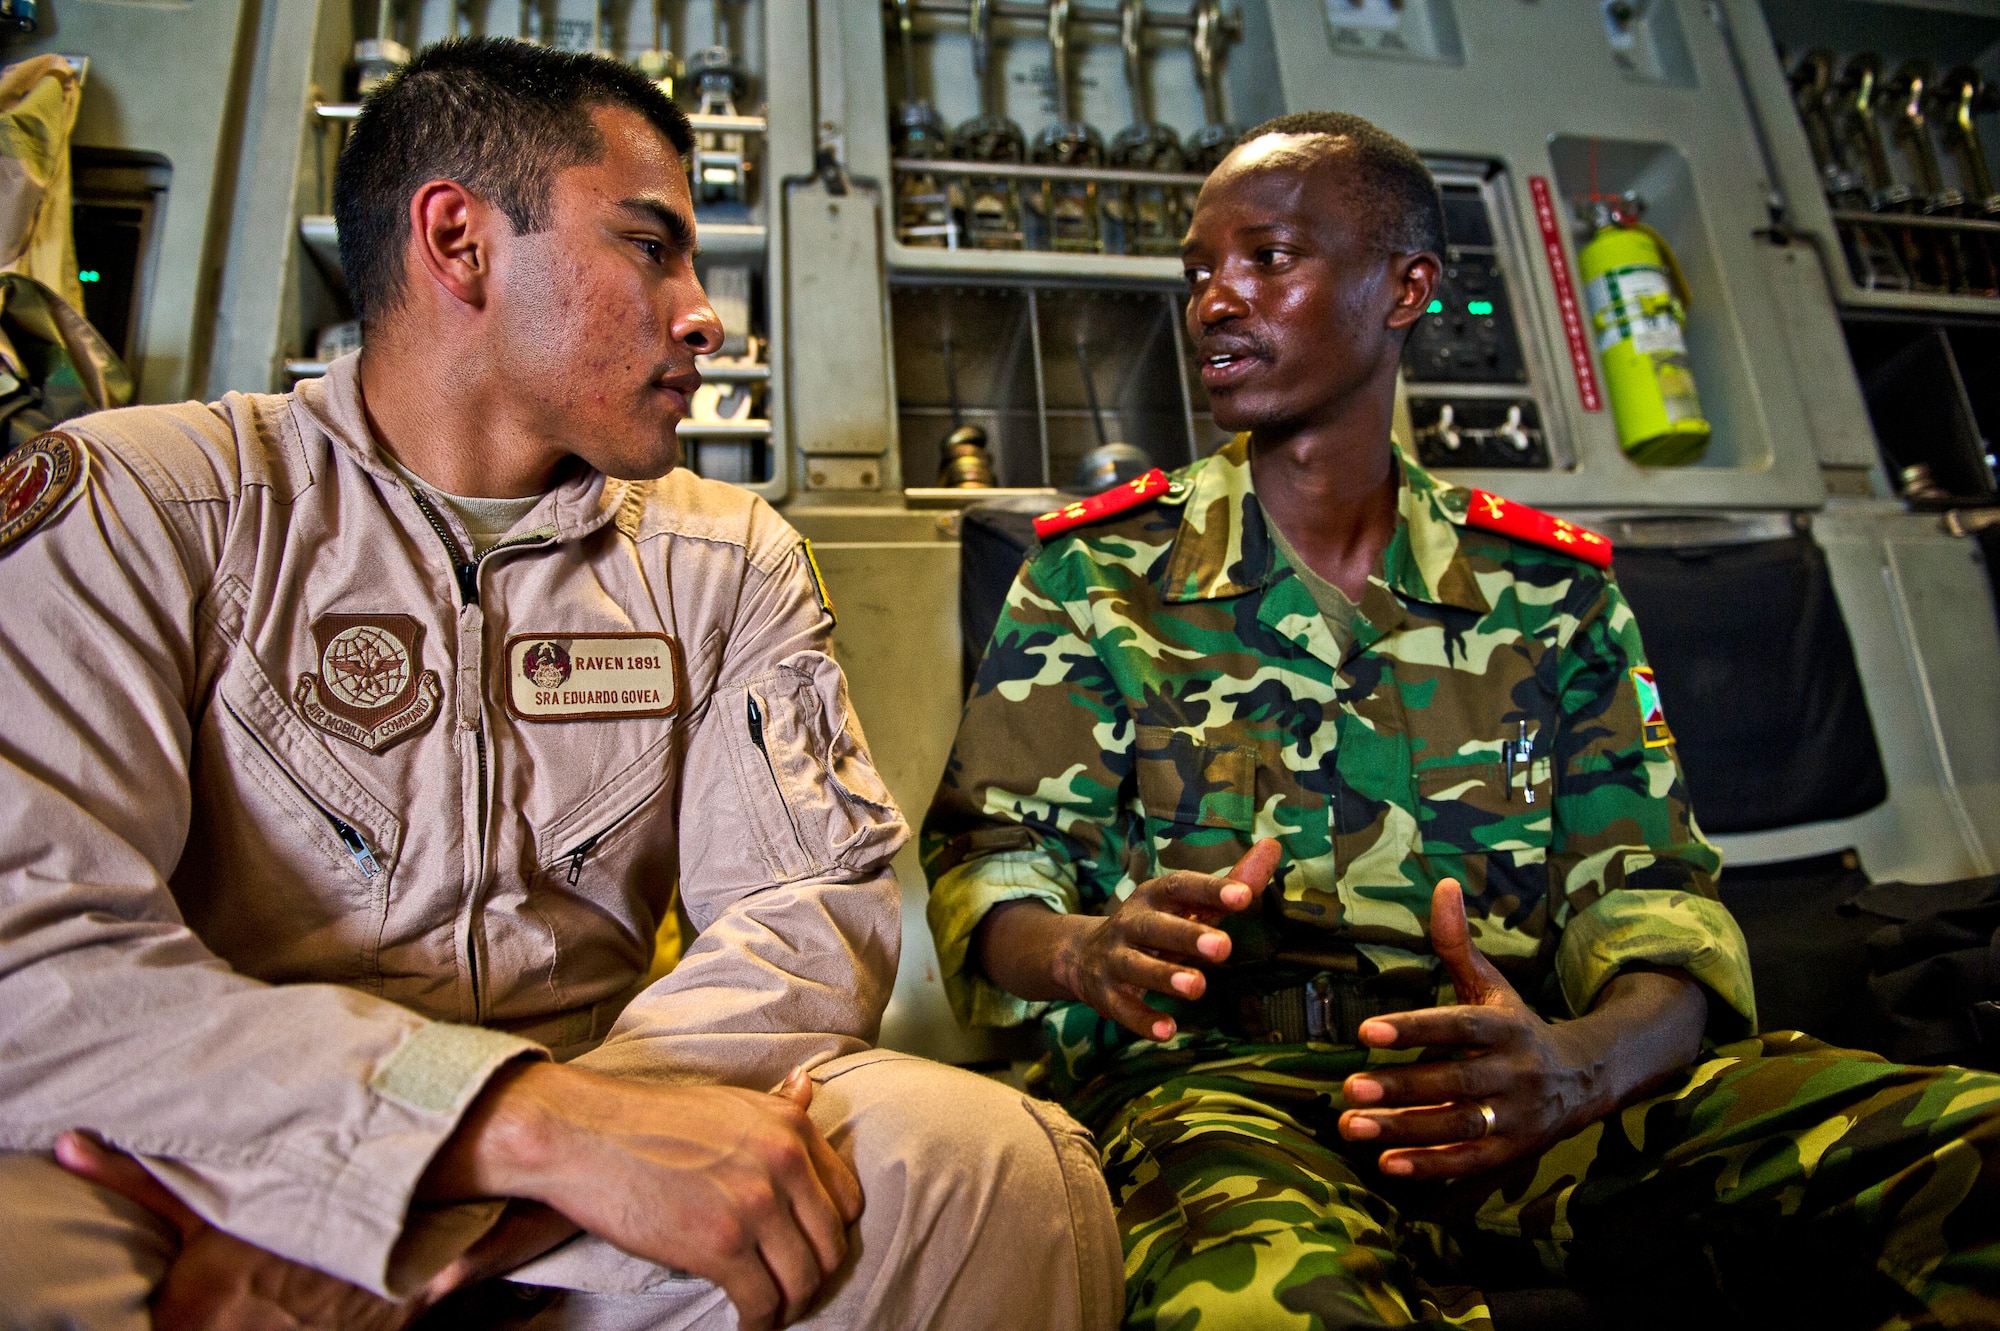 Senior Airman Edurado Govea, a Security Forces Phoenix Raven, speaks with a Burundi soldier before take off in a C-17 Globemaster Dec. 13, 2013 at Bujmumbura Airport, Burundi. In coordination with the French military and African Union, the U.S. military provided airlift support to transport Burundi soldiers, food and supplies in the Central African Republic. This support is aimed at enabling African forces to deploy promptly to prevent further spread of sectarian violence and restore security in CAR. (U.S. Air Force photo/Staff Sgt. Erik Cardenas)